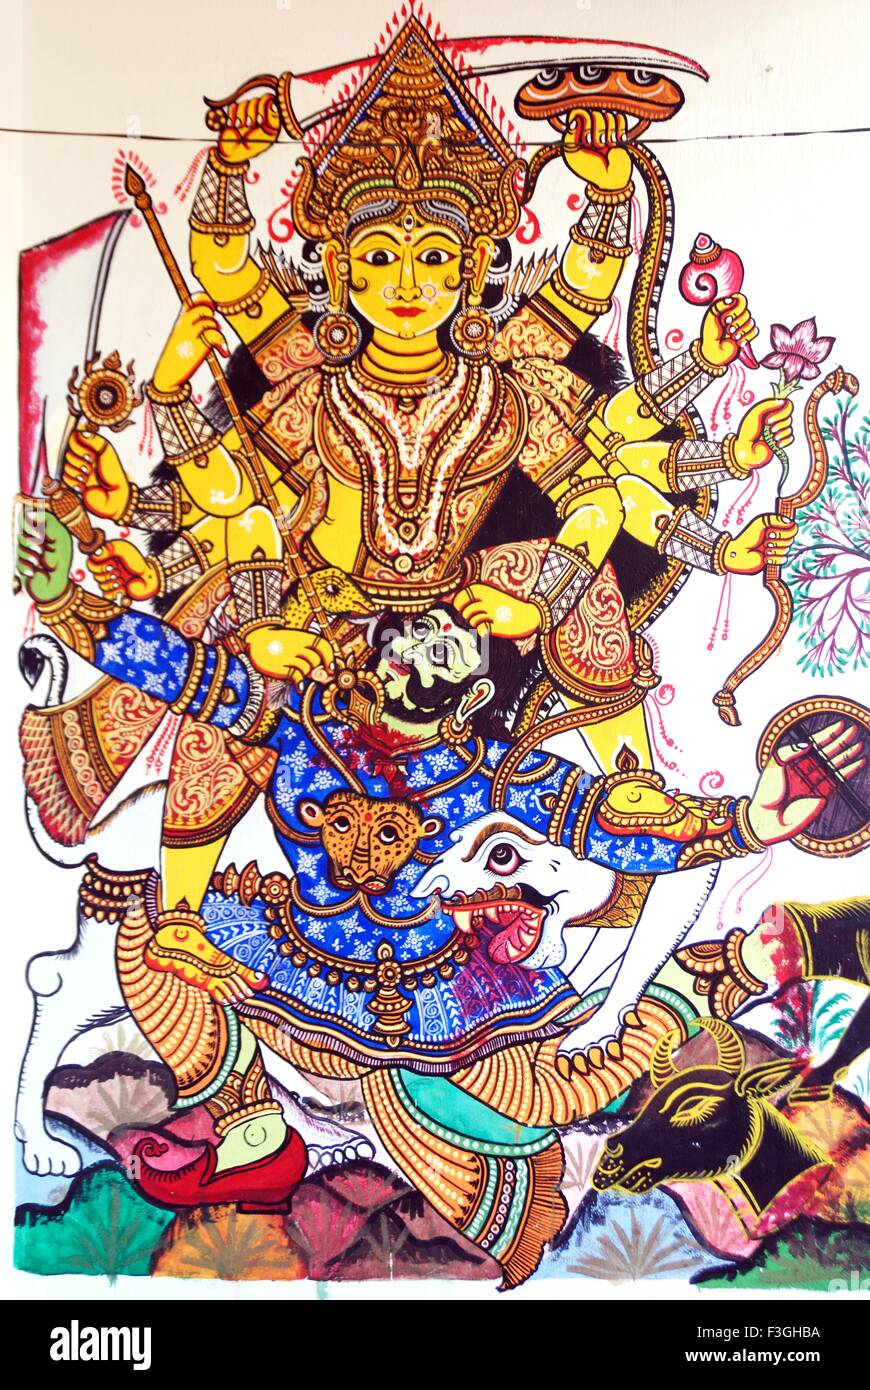 Black Gel Pen And Red Sketch Paper Maa Durga Painting, Size: Foresqure